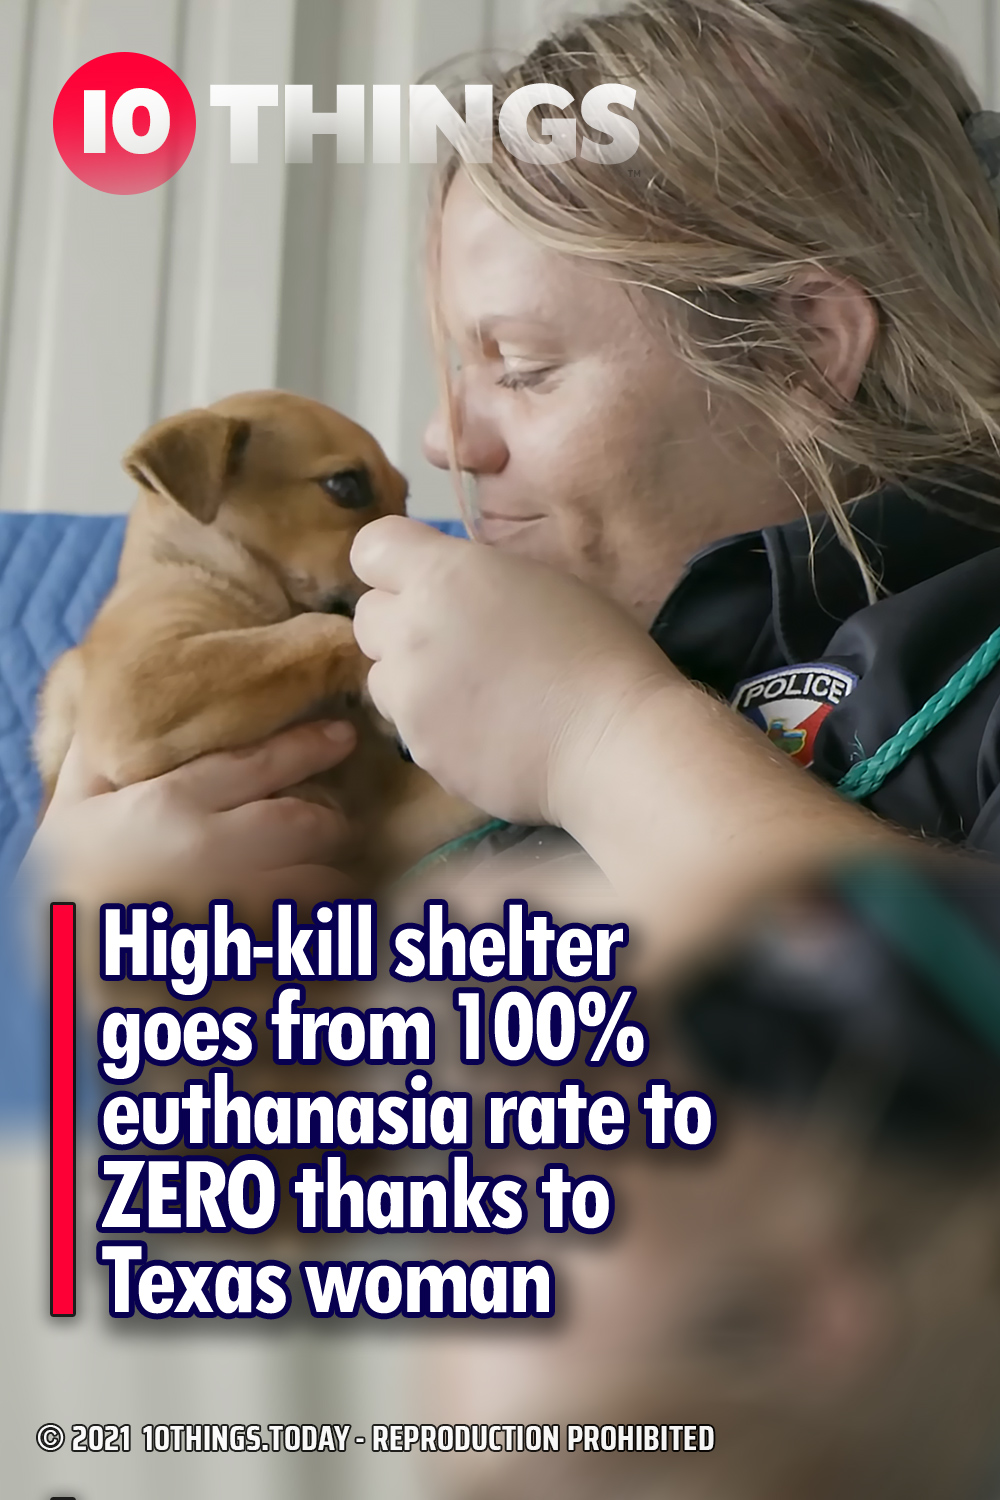 High-kill shelter goes from 100% euthanasia rate to ZERO thanks to Texas woman